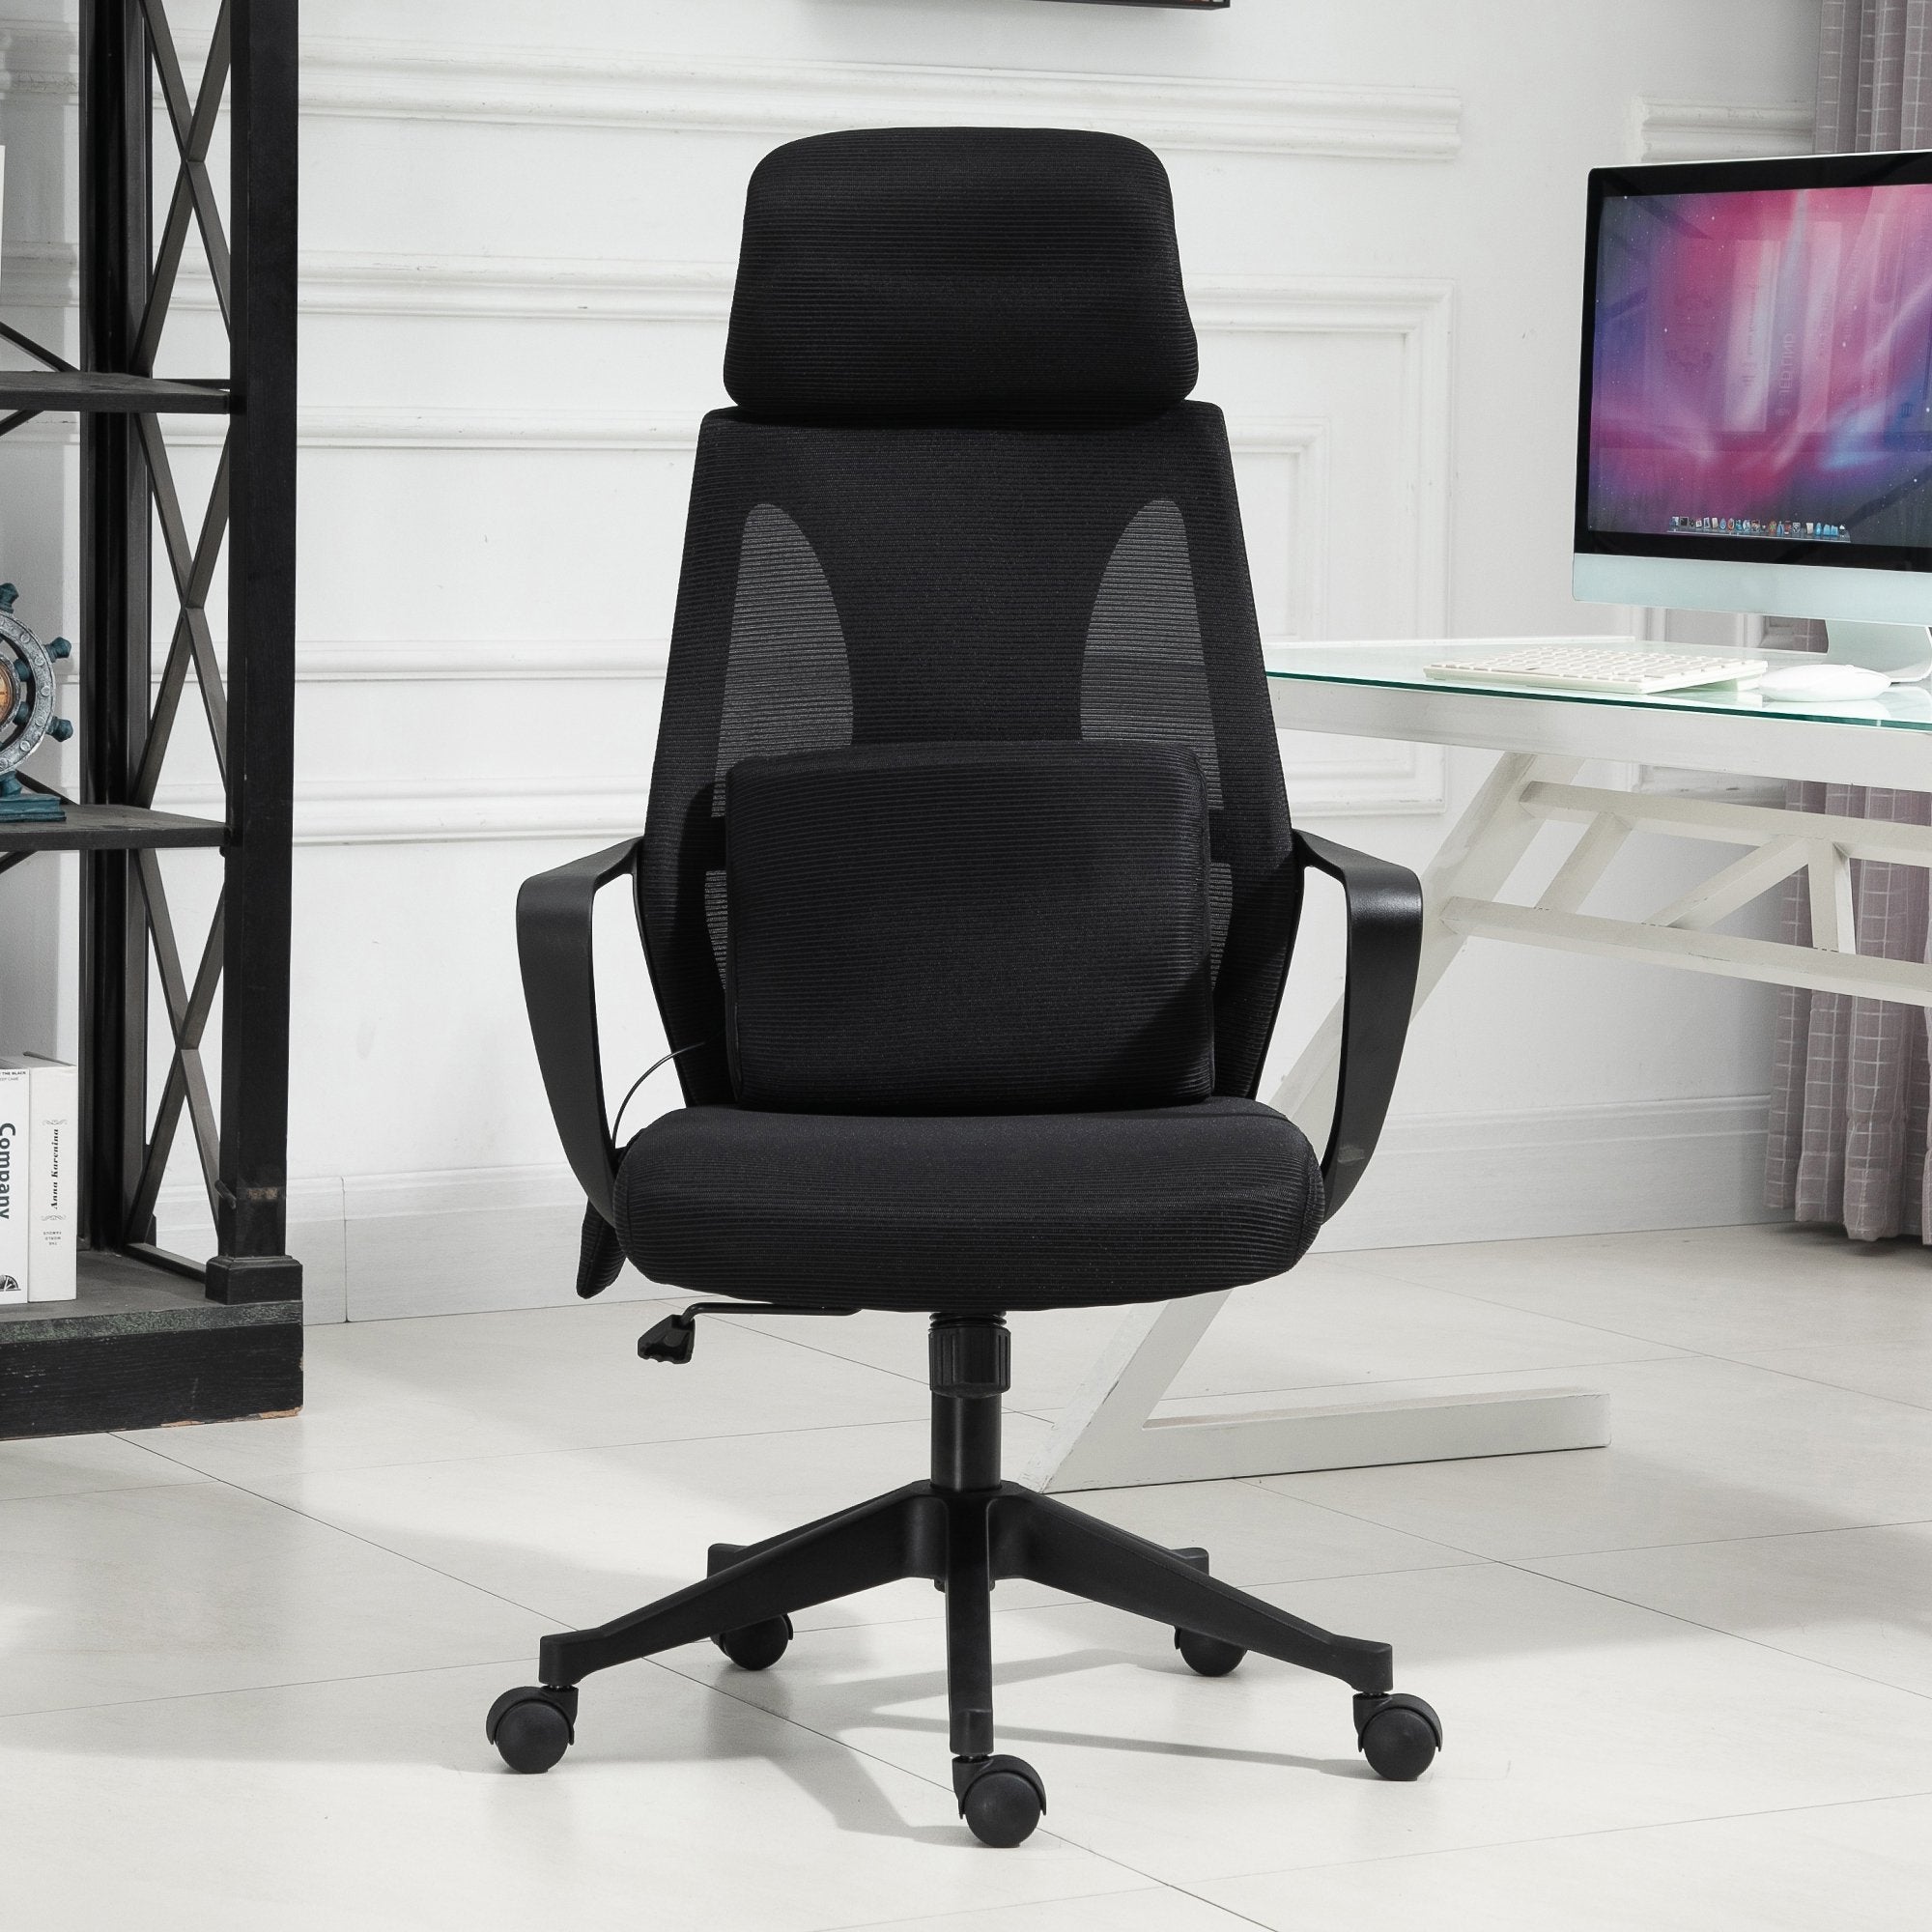 Adjustable Seat Headrest Rocking Functional Office Chair Computer Swivel Chair with Massage Lumbar Cushion